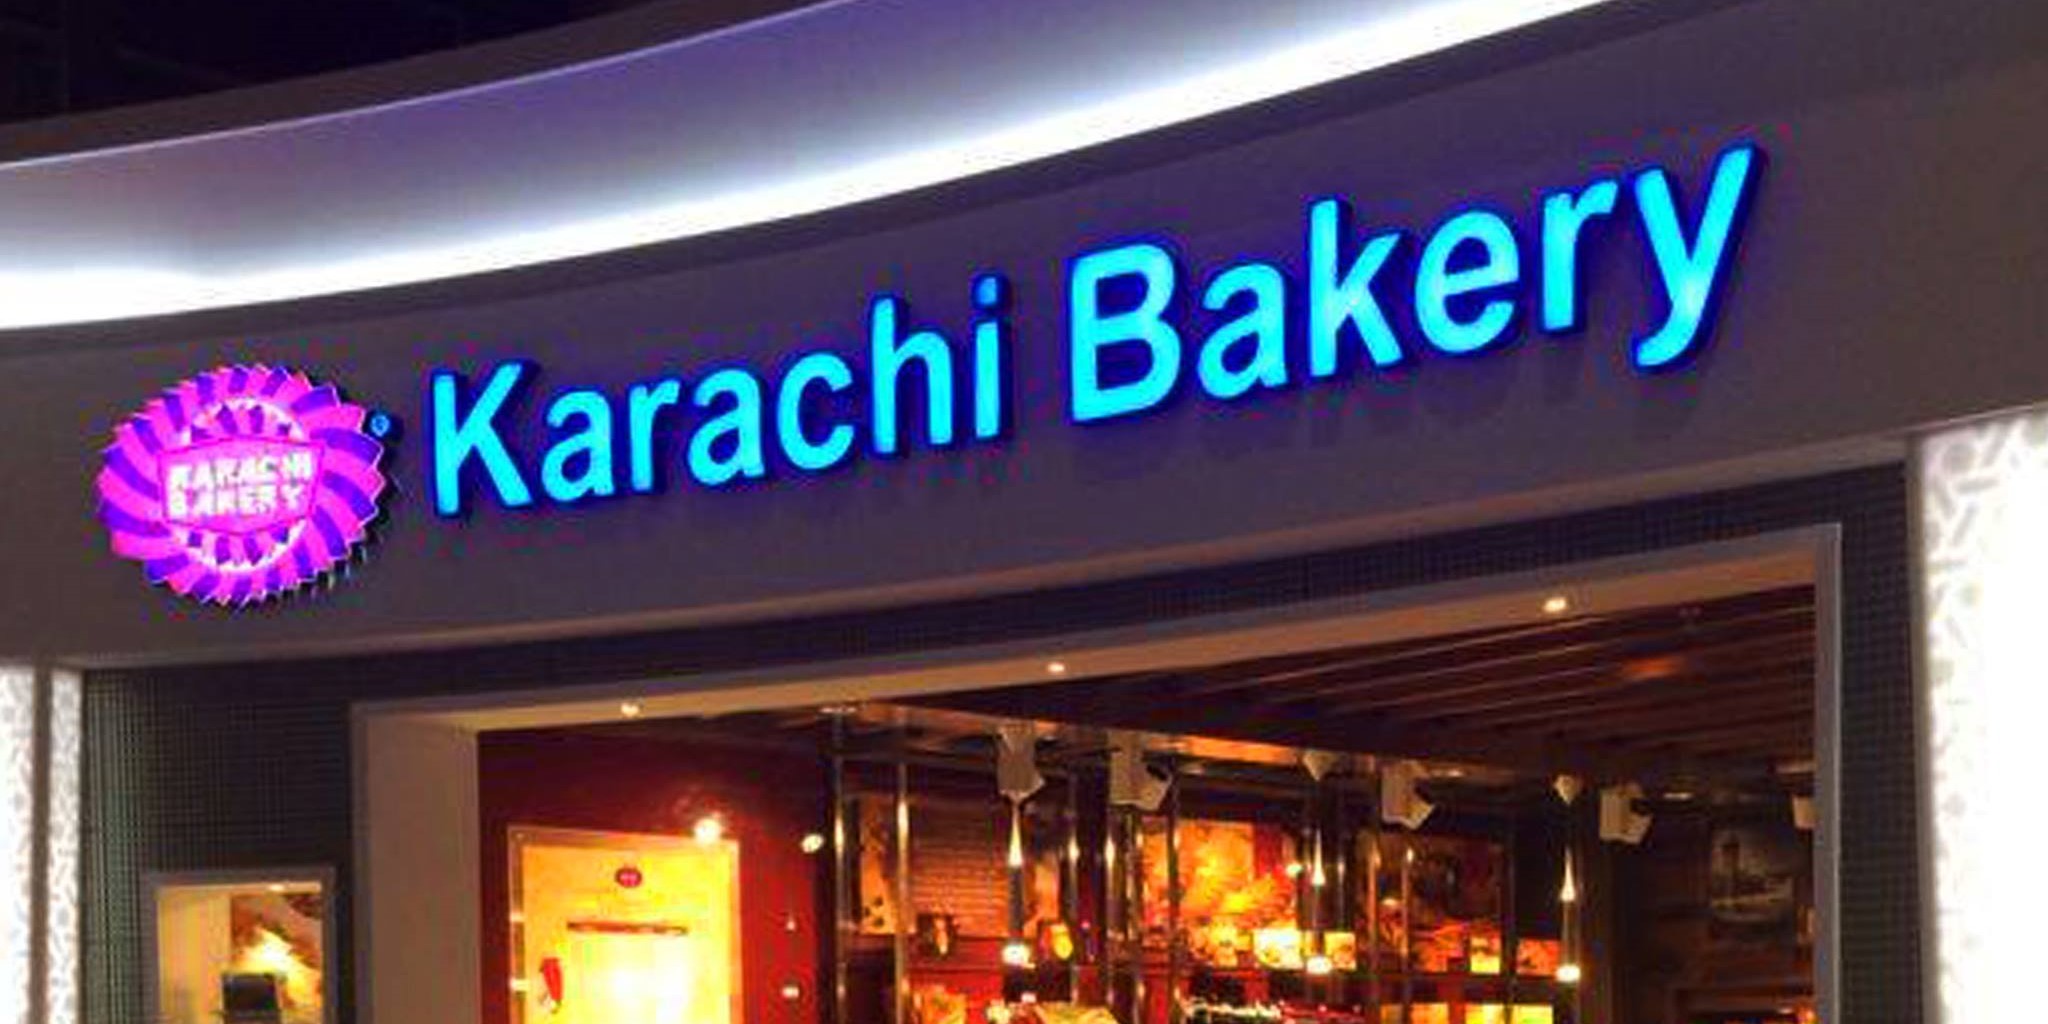 Hyderabad’s Karachi Bakery features in ‘TasteAtlas’, ranks 29 among 150 most legendary dessert places in the world